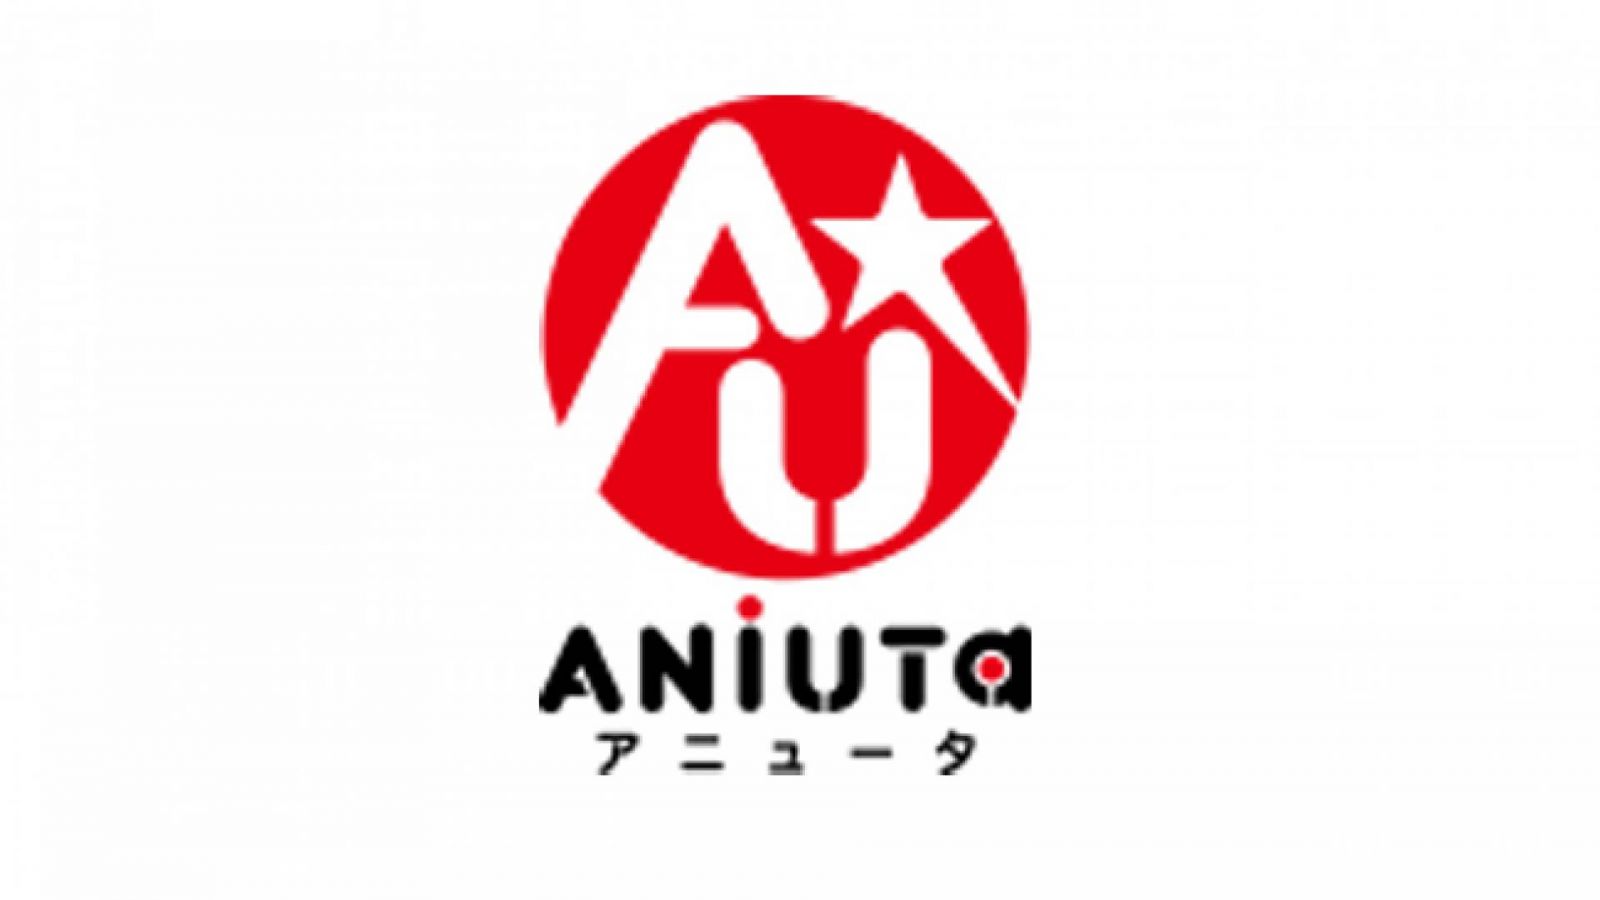 New Anime Music Streaming Subscription Service ANiUTa Has Launched © ANiUTa. All rights reserved.